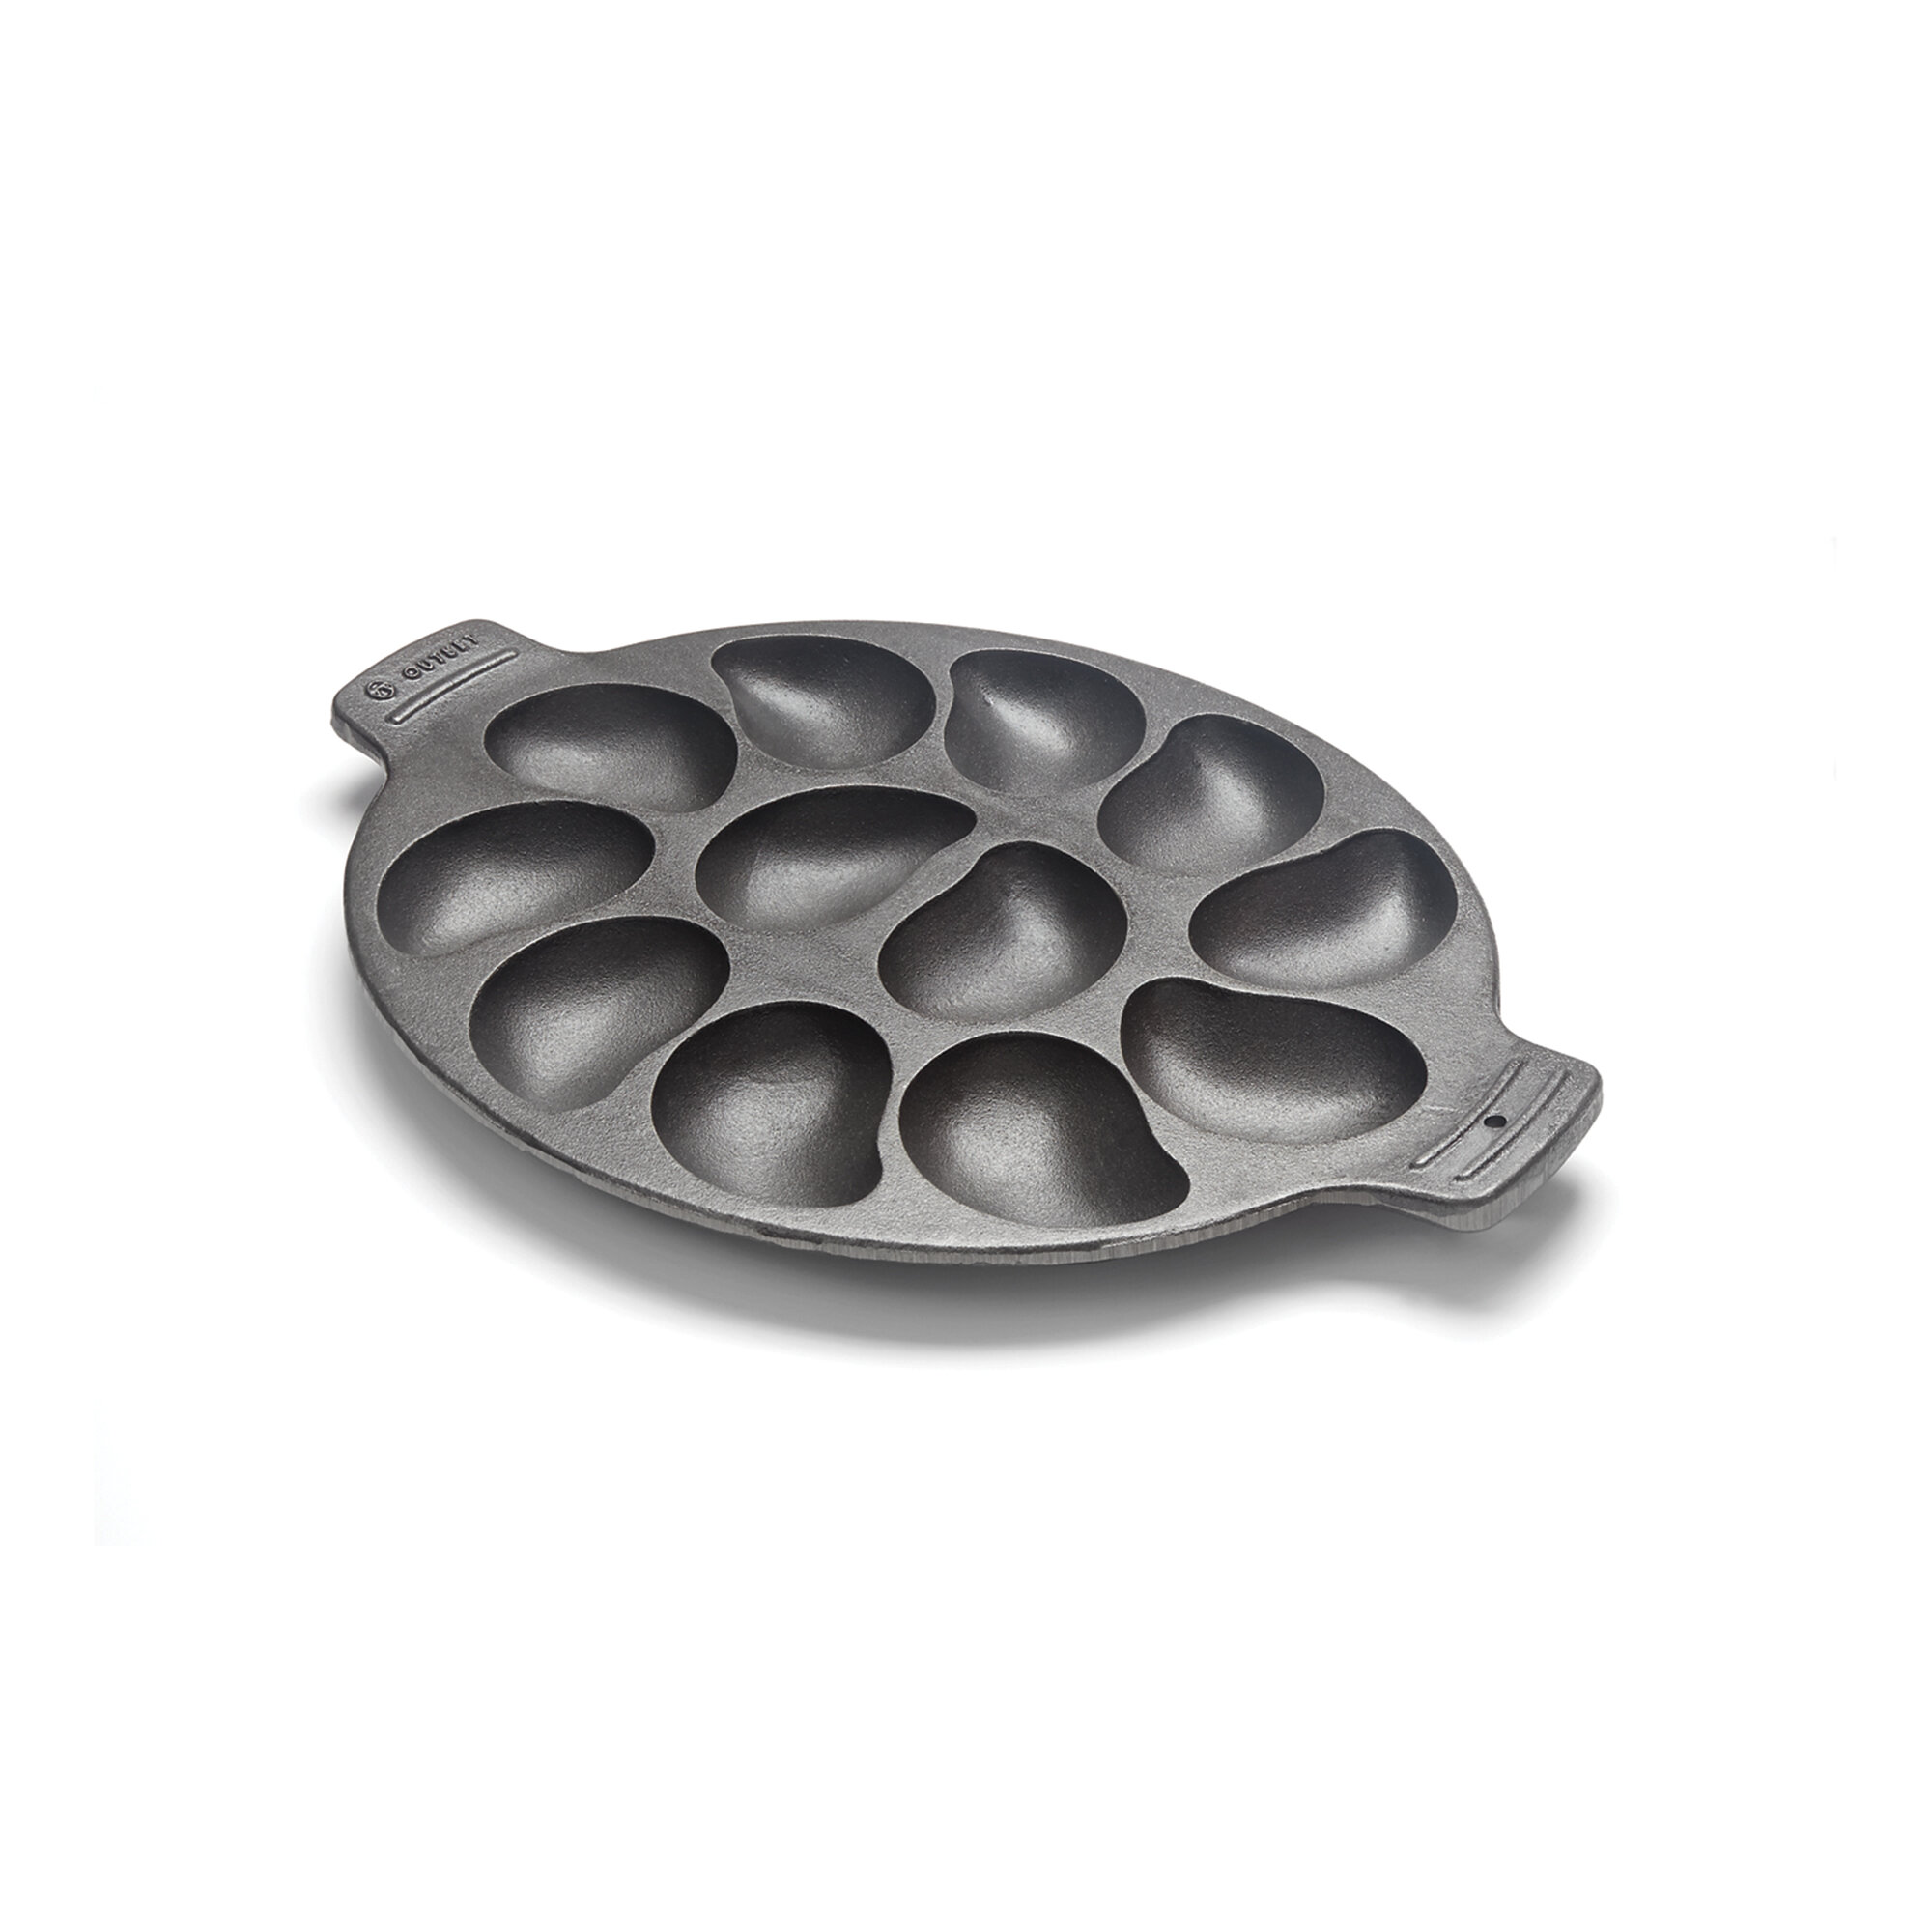 Le Creuset Enameled Cast Iron 9.5 Square Griddle Pan - Oyster